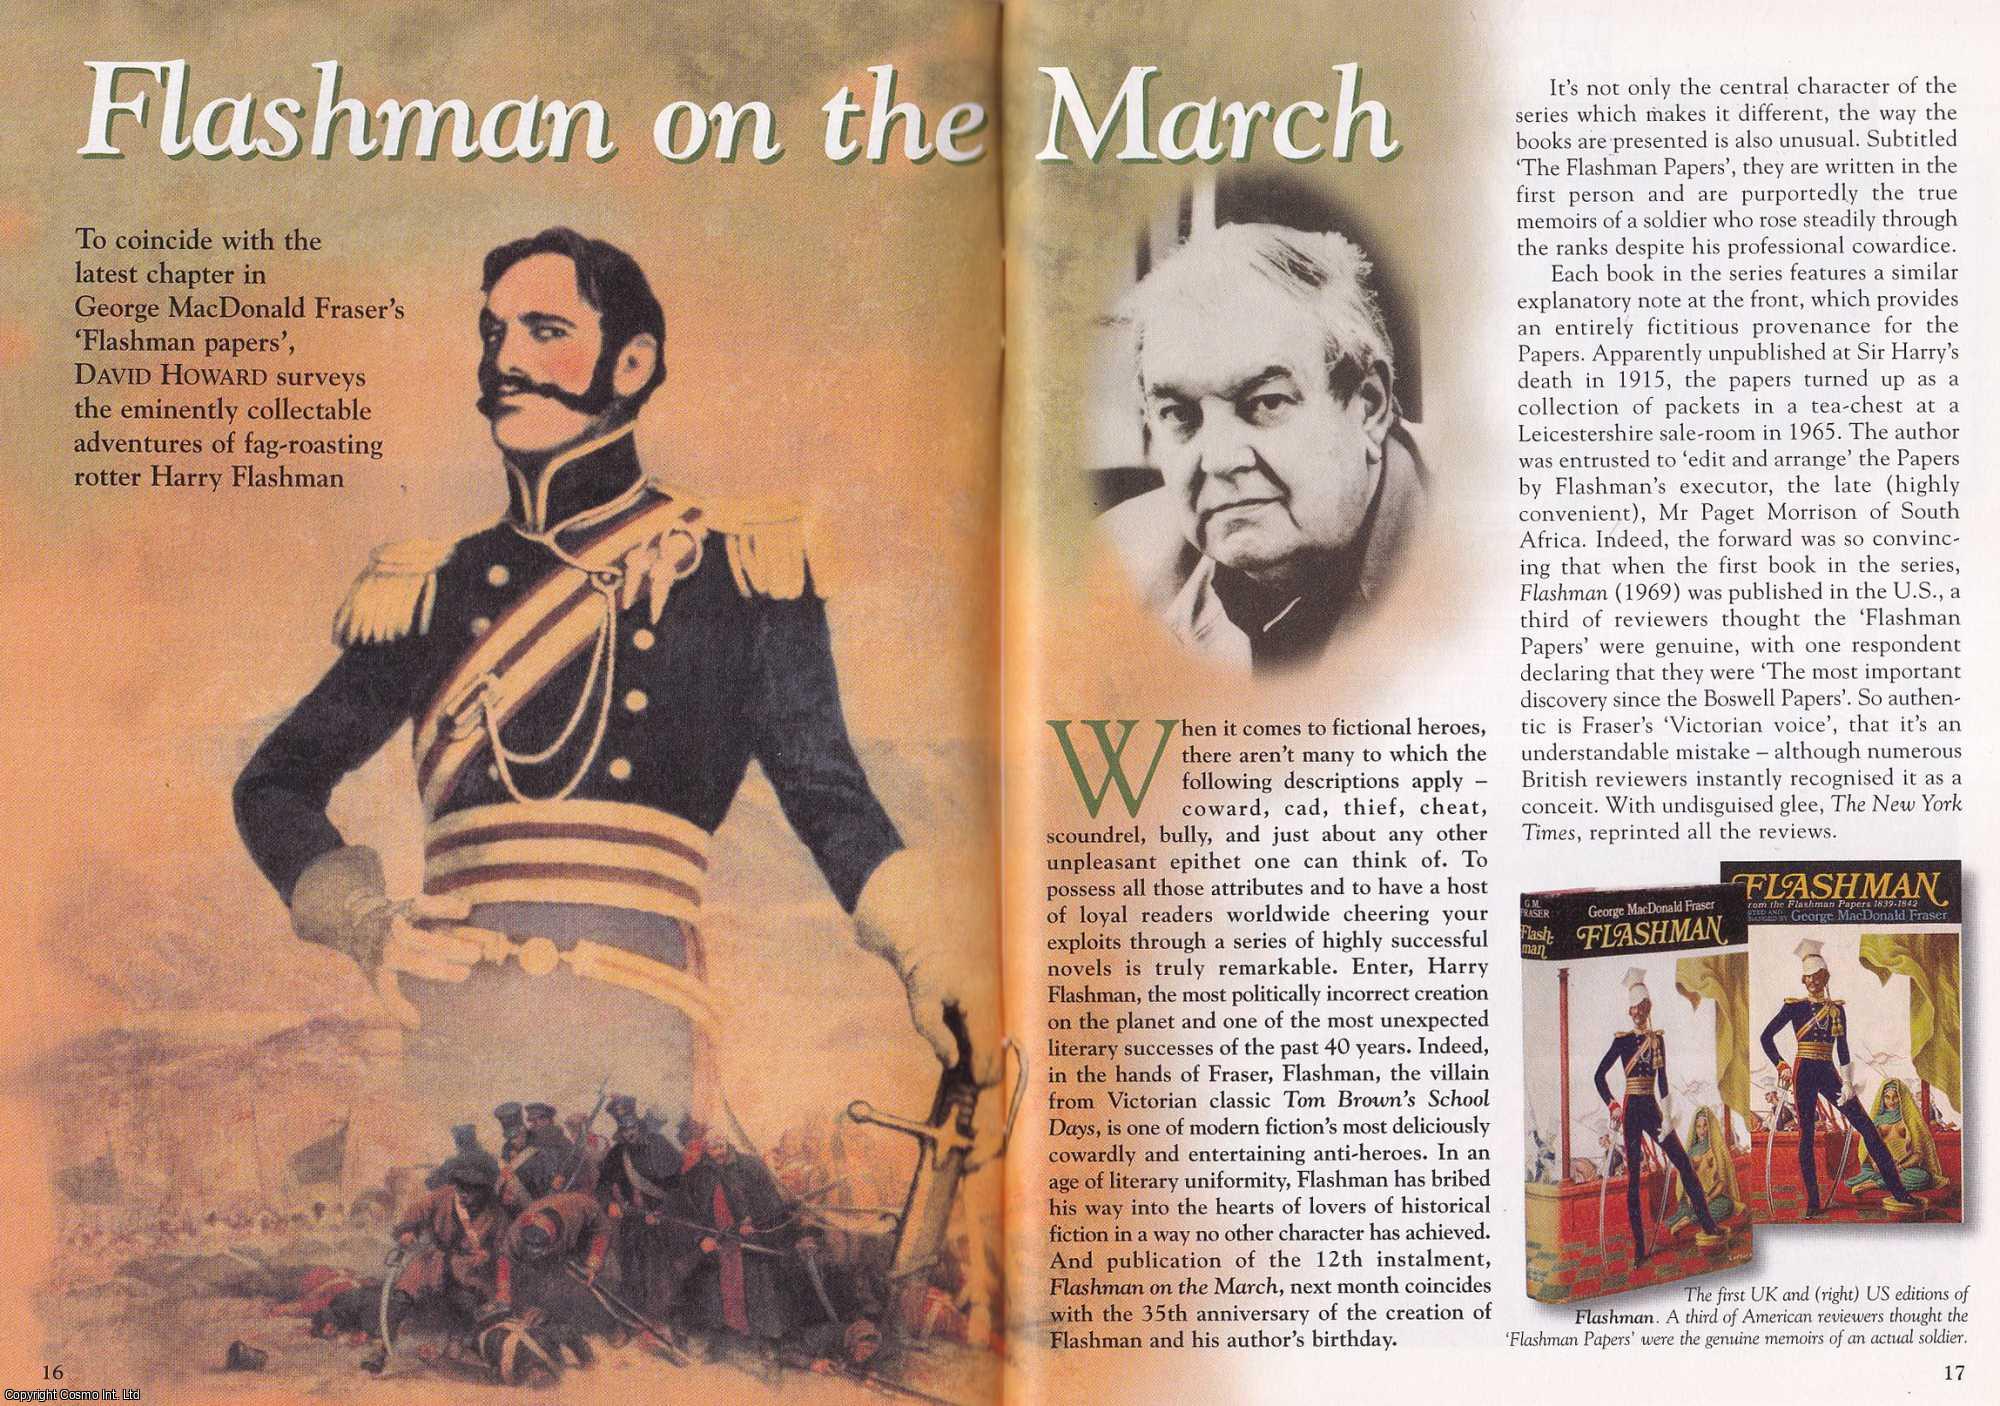 David Howard - Flashman on The March. The Eminently Collectable Adventures of Fag-Roasting Rotter Harry Flashman. This is an original article separated from an issue of The Book & Magazine Collector publication, 2005.